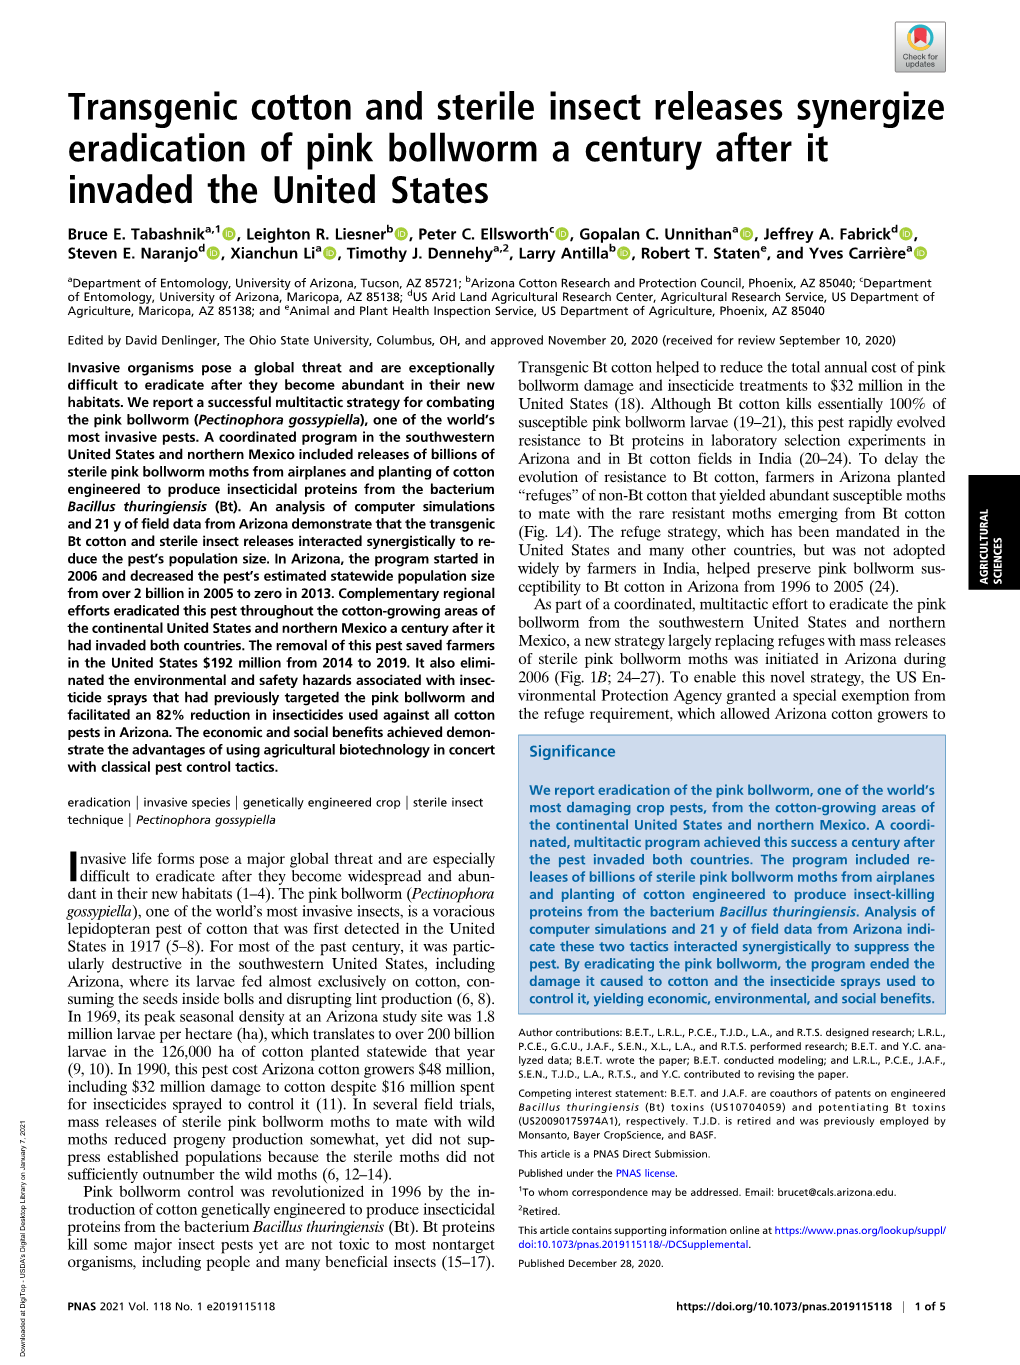 Transgenic Cotton and Sterile Insect Releases Synergize Eradication of Pink Bollworm a Century After It Invaded the United States